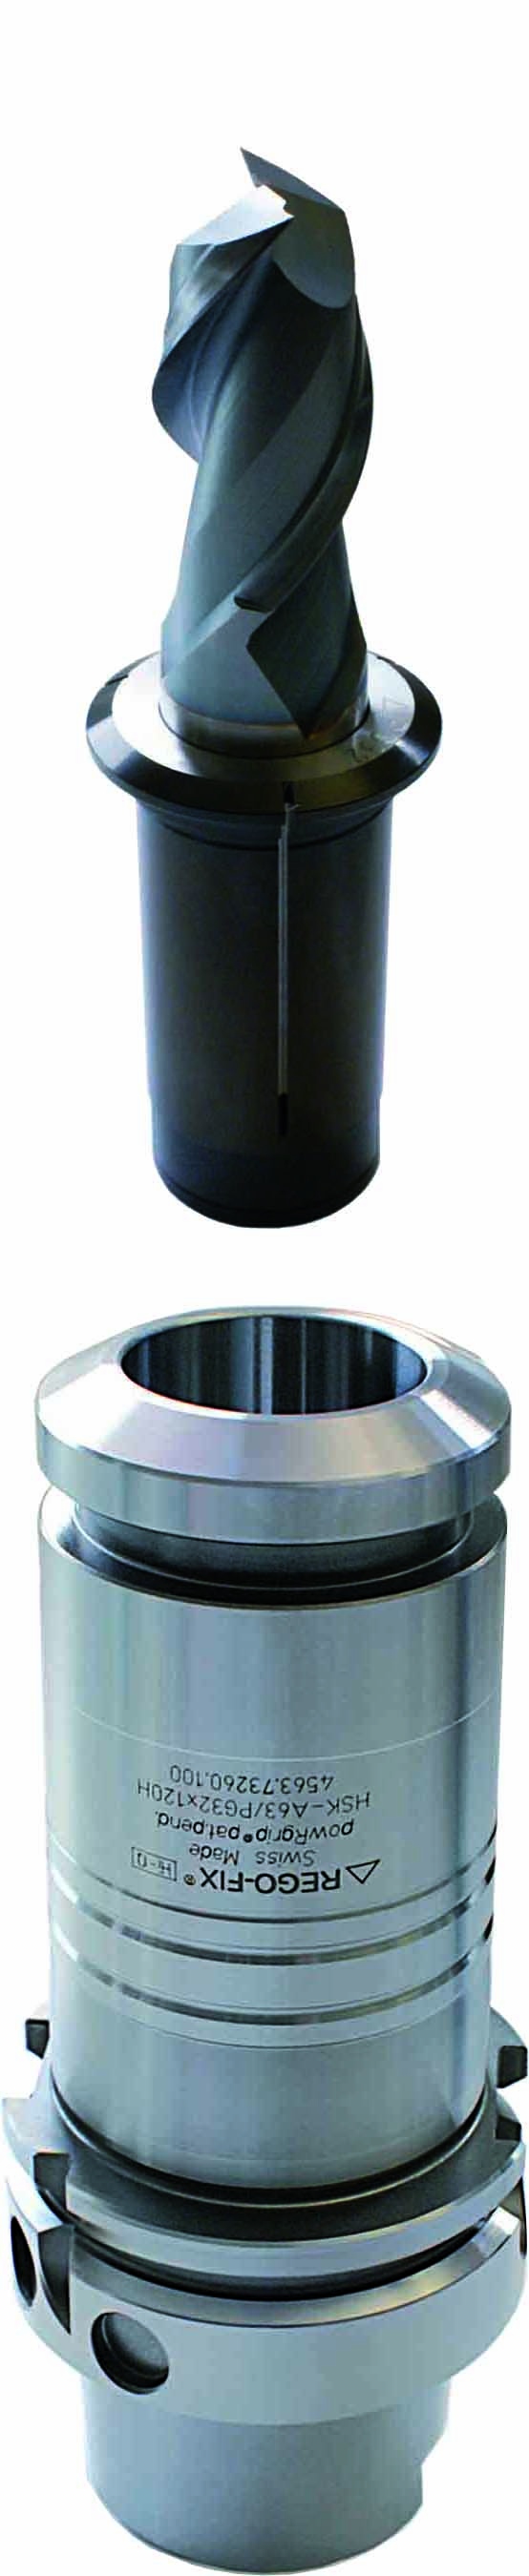 Hsk collet and cutter trans